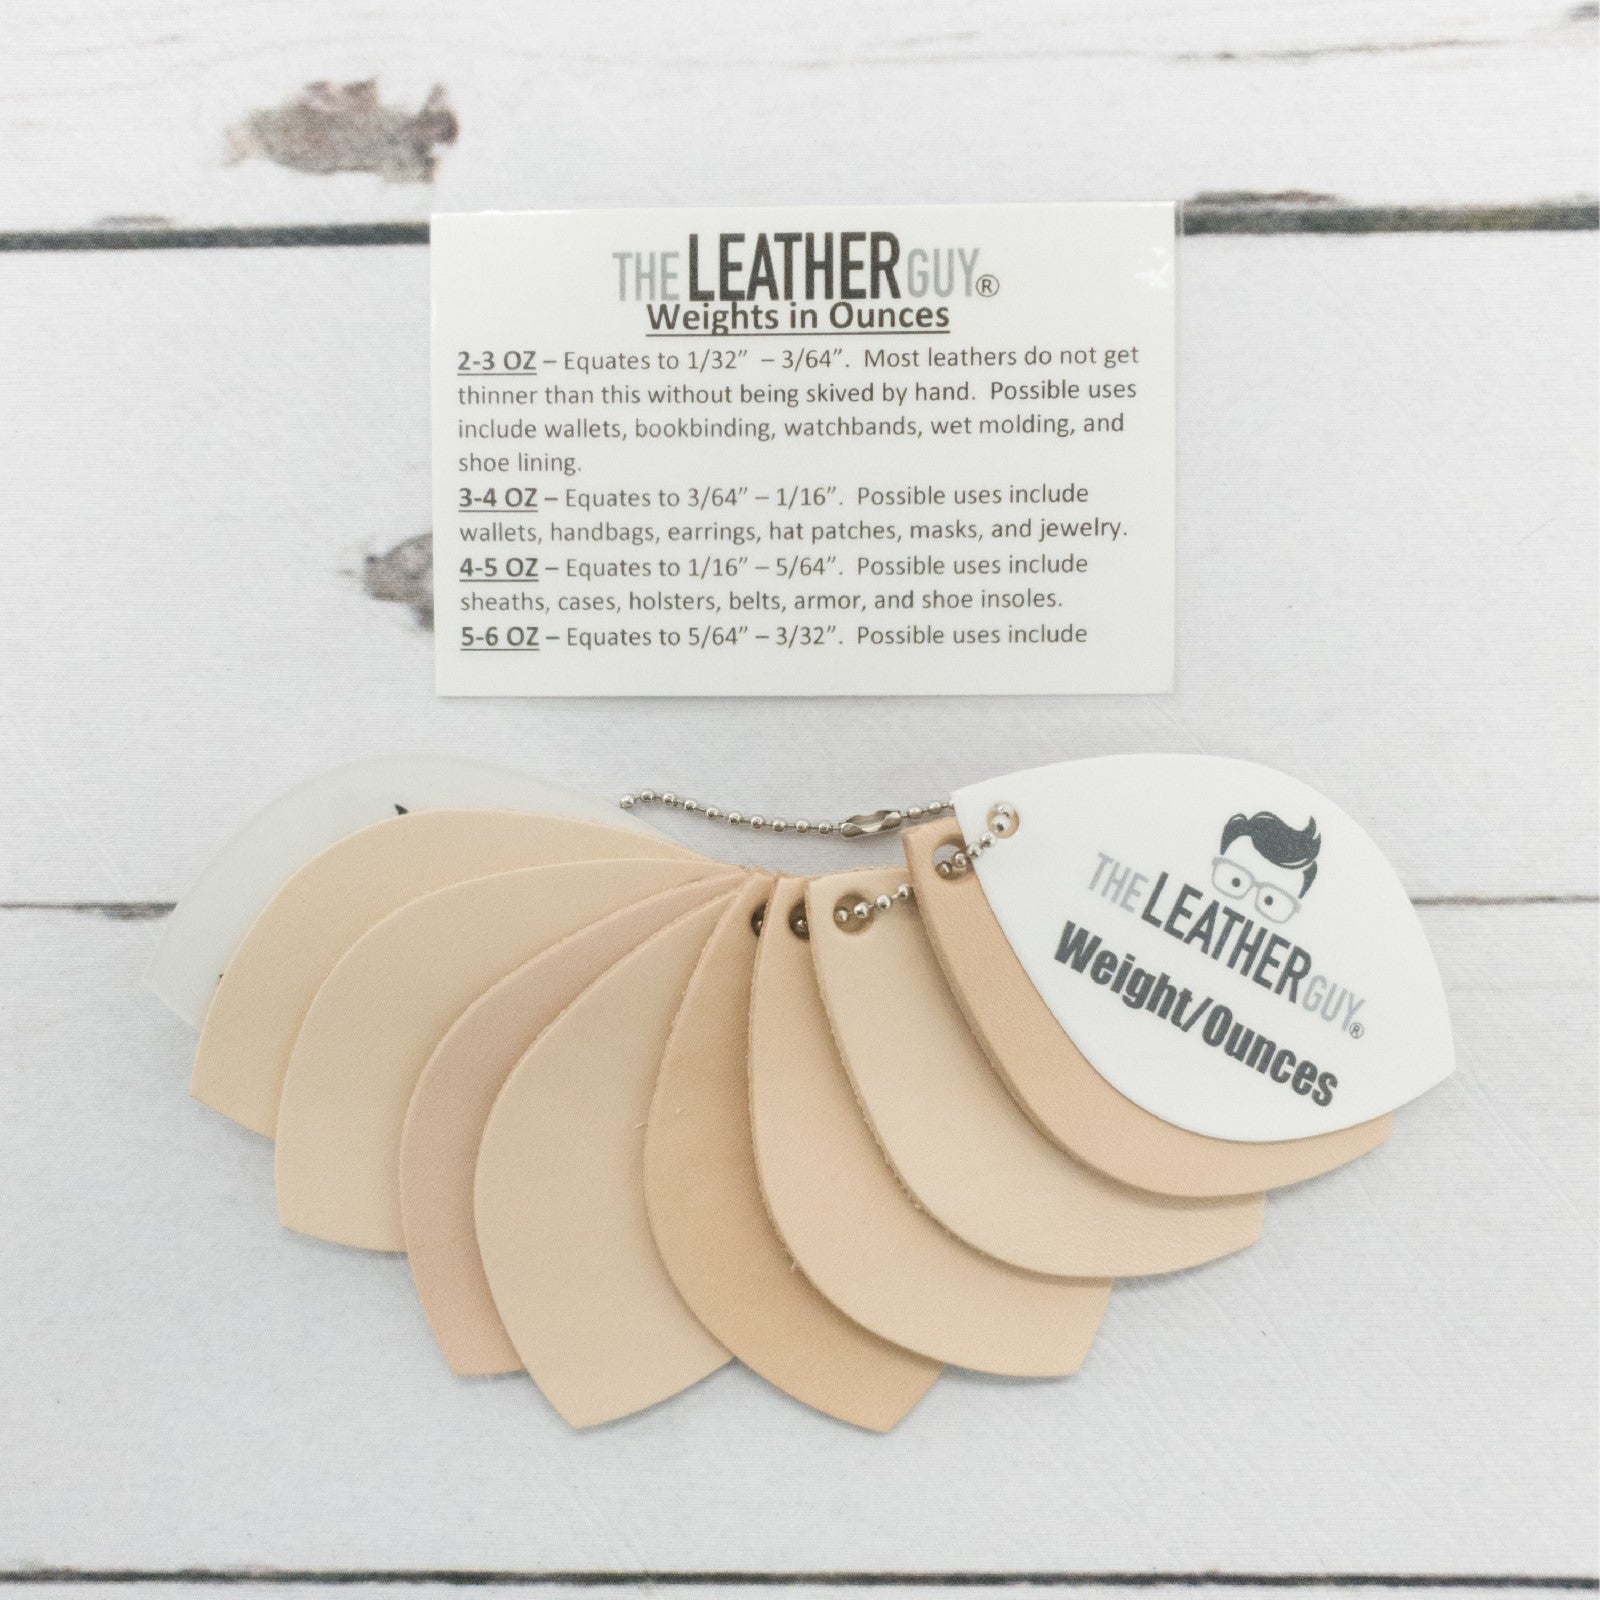 Leather Reference Sample Ring Beginner Information, Weights in Ounces | The Leather Guy